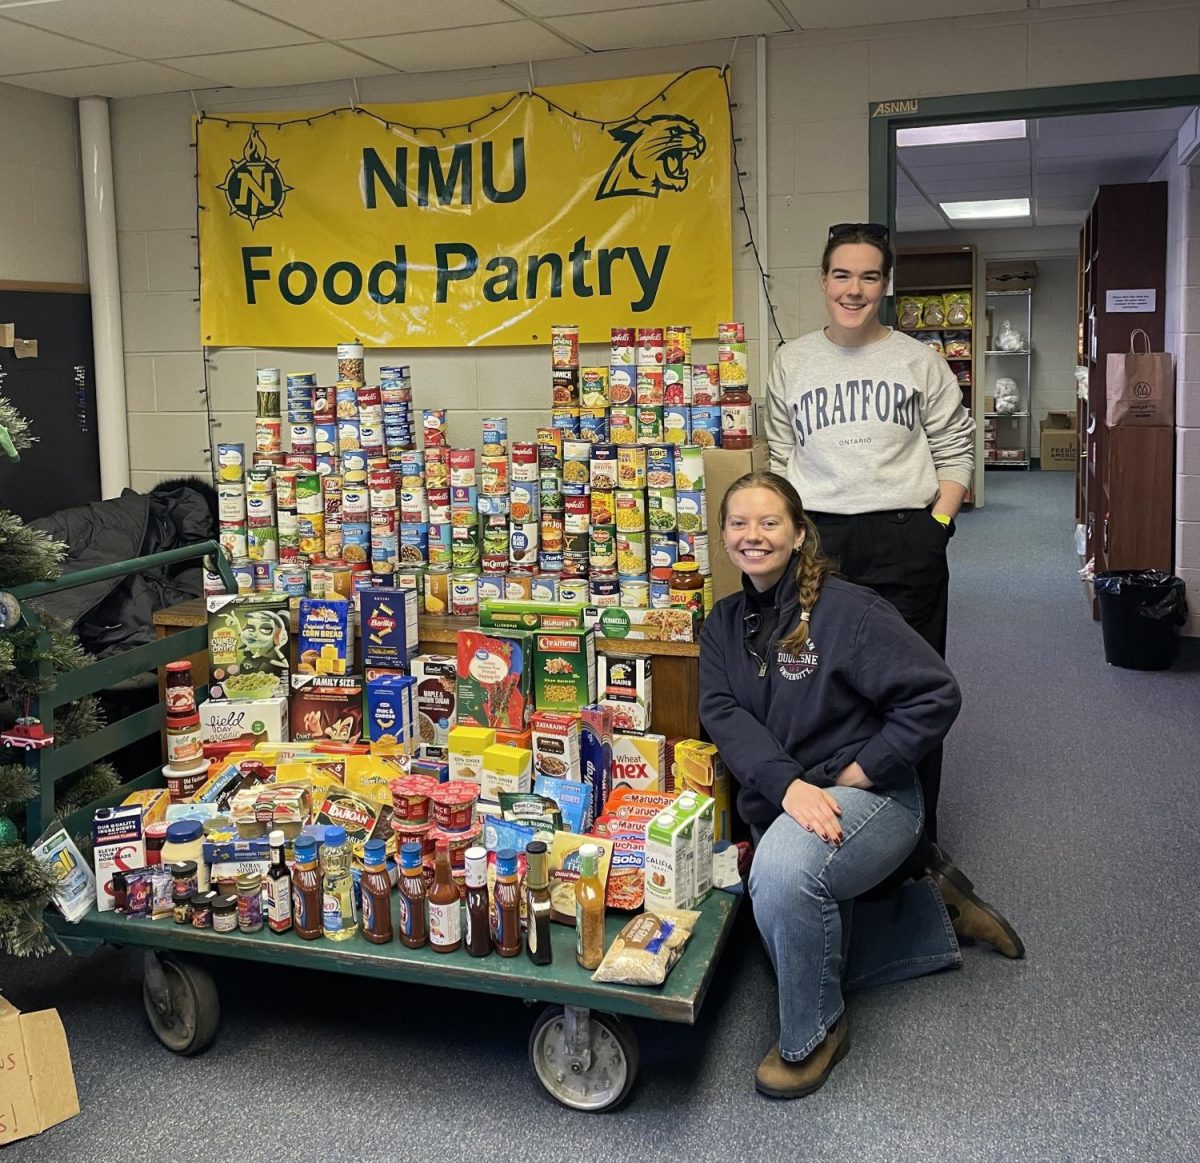 A PROUD COLLECTION — Carico (front) and Mary Kelly (back) pose in front of their food pantry collection. Photo Courtesy of Madison Carico